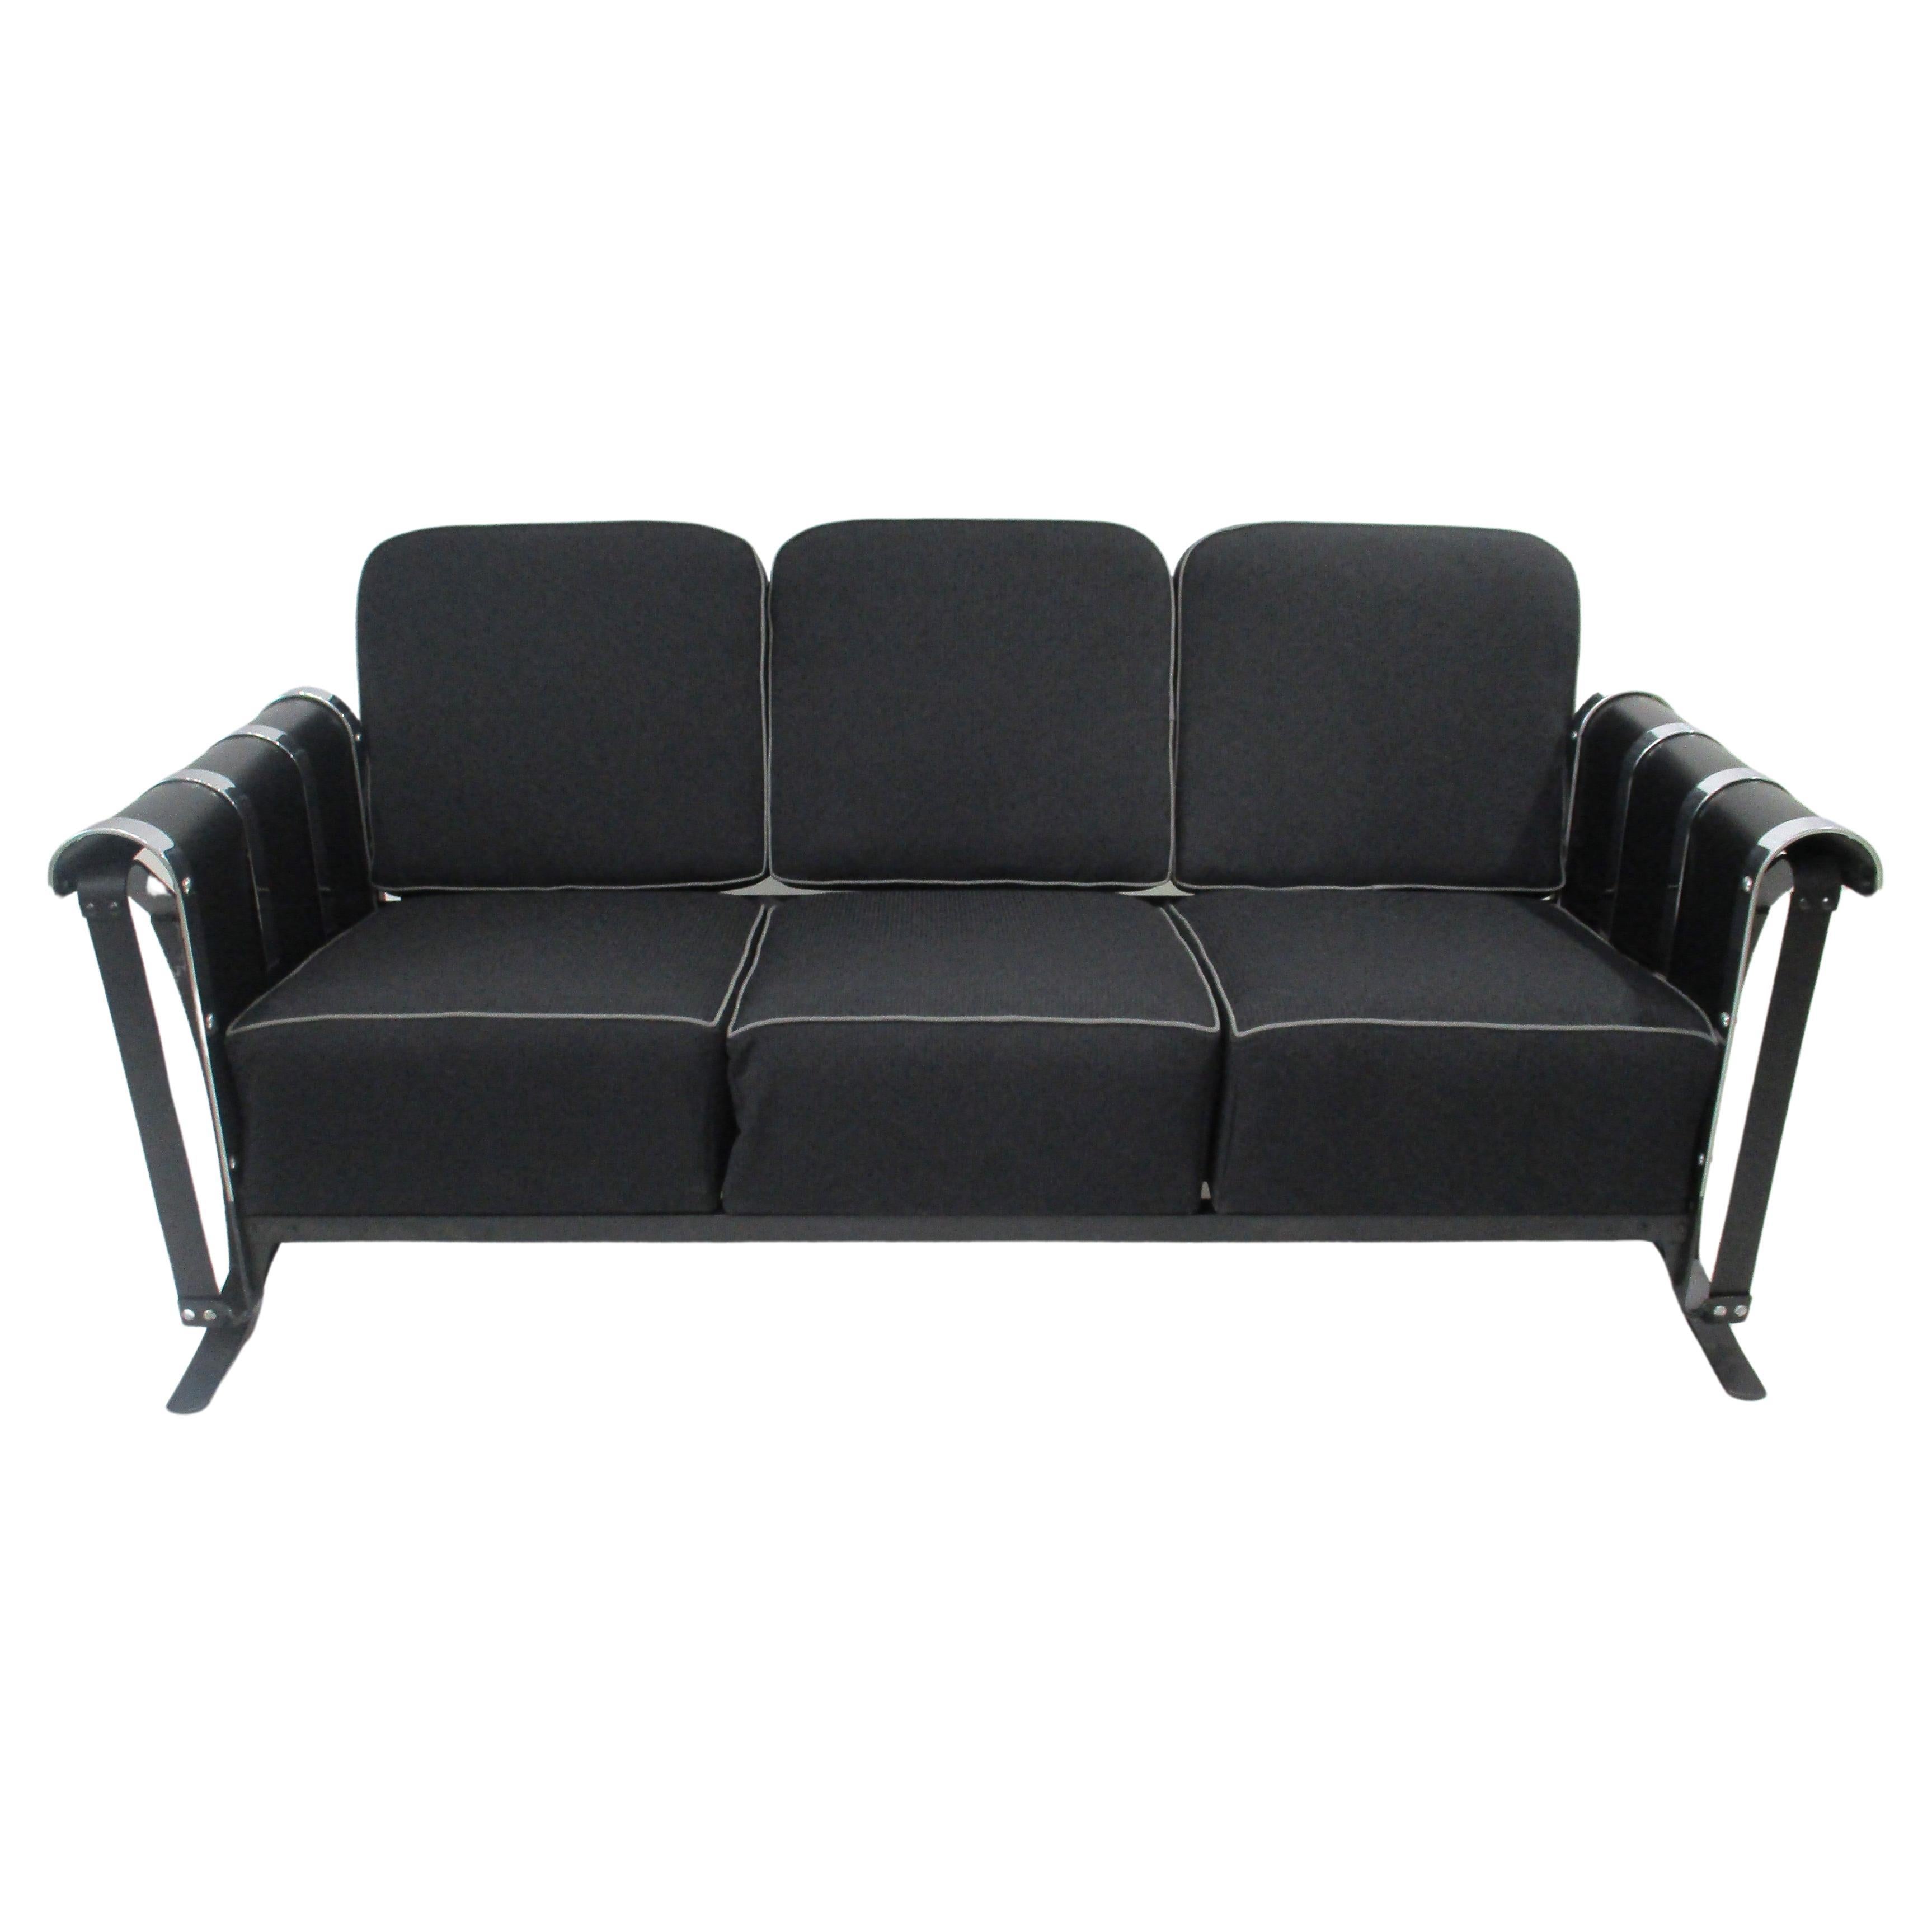 A steel framed satin black glider sofa with curved chrome and metal banded arms black upholstered cushions with medium gray piping . To each end there are sculptural flat bar supports integrated into the sides giving the piece an extra design